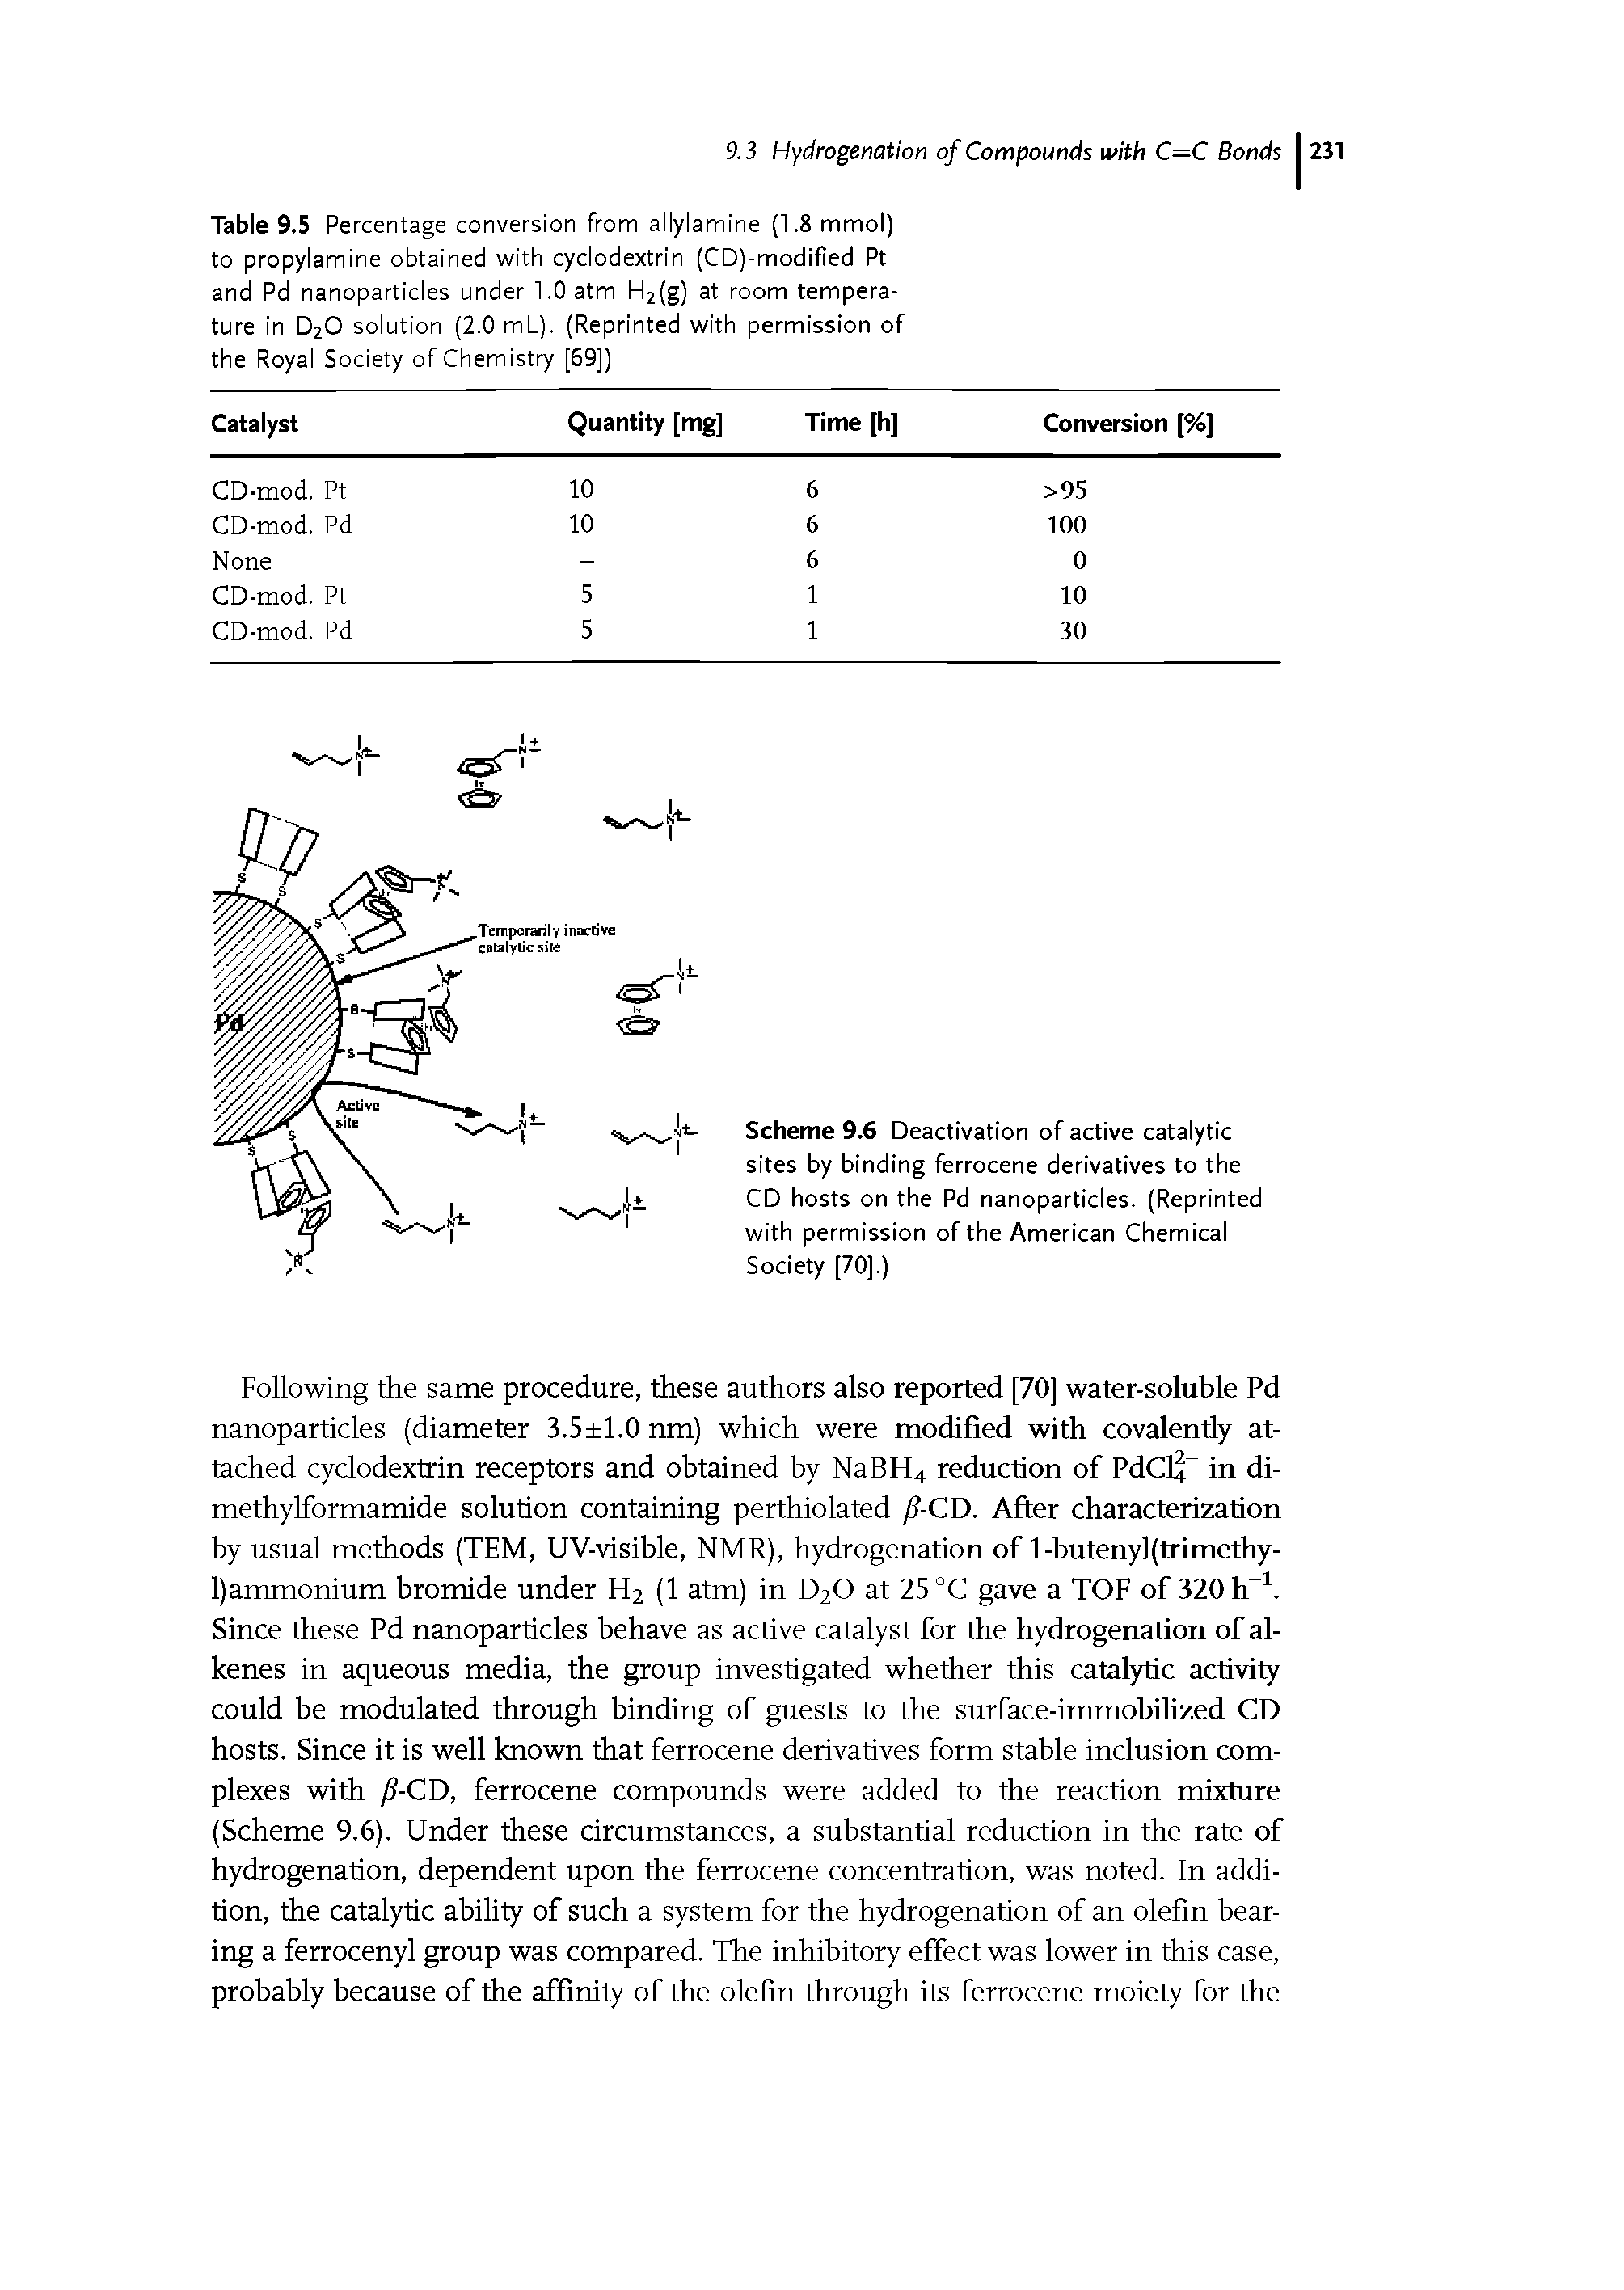 Table 9.5 Percentage conversion from allylamine (1.8 mmol) to propylamine obtained with cyclodextrin (CD)-modified Pt and Pd nanoparticles under 1.0 atm H2(g) at room tempera ture in D20 solution (2.0 ml ). (Reprinted with permission of the Royal Society of Chemistry [69])...